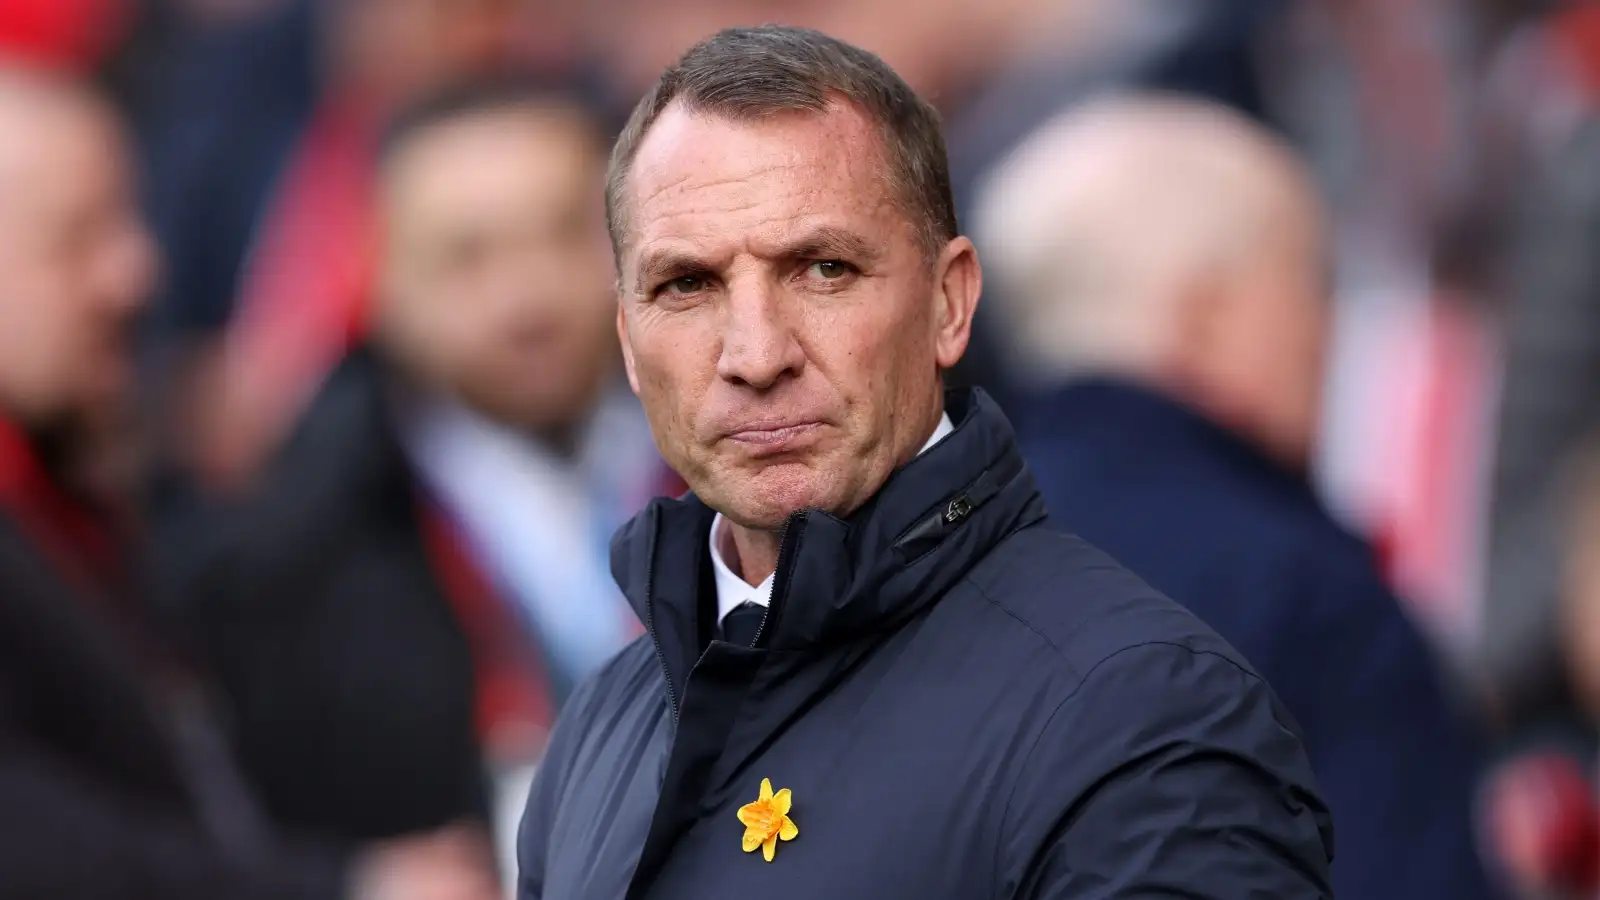 Brendan Rodgers would be a good Spurs manager - better than most Spurs fans are willing to admit